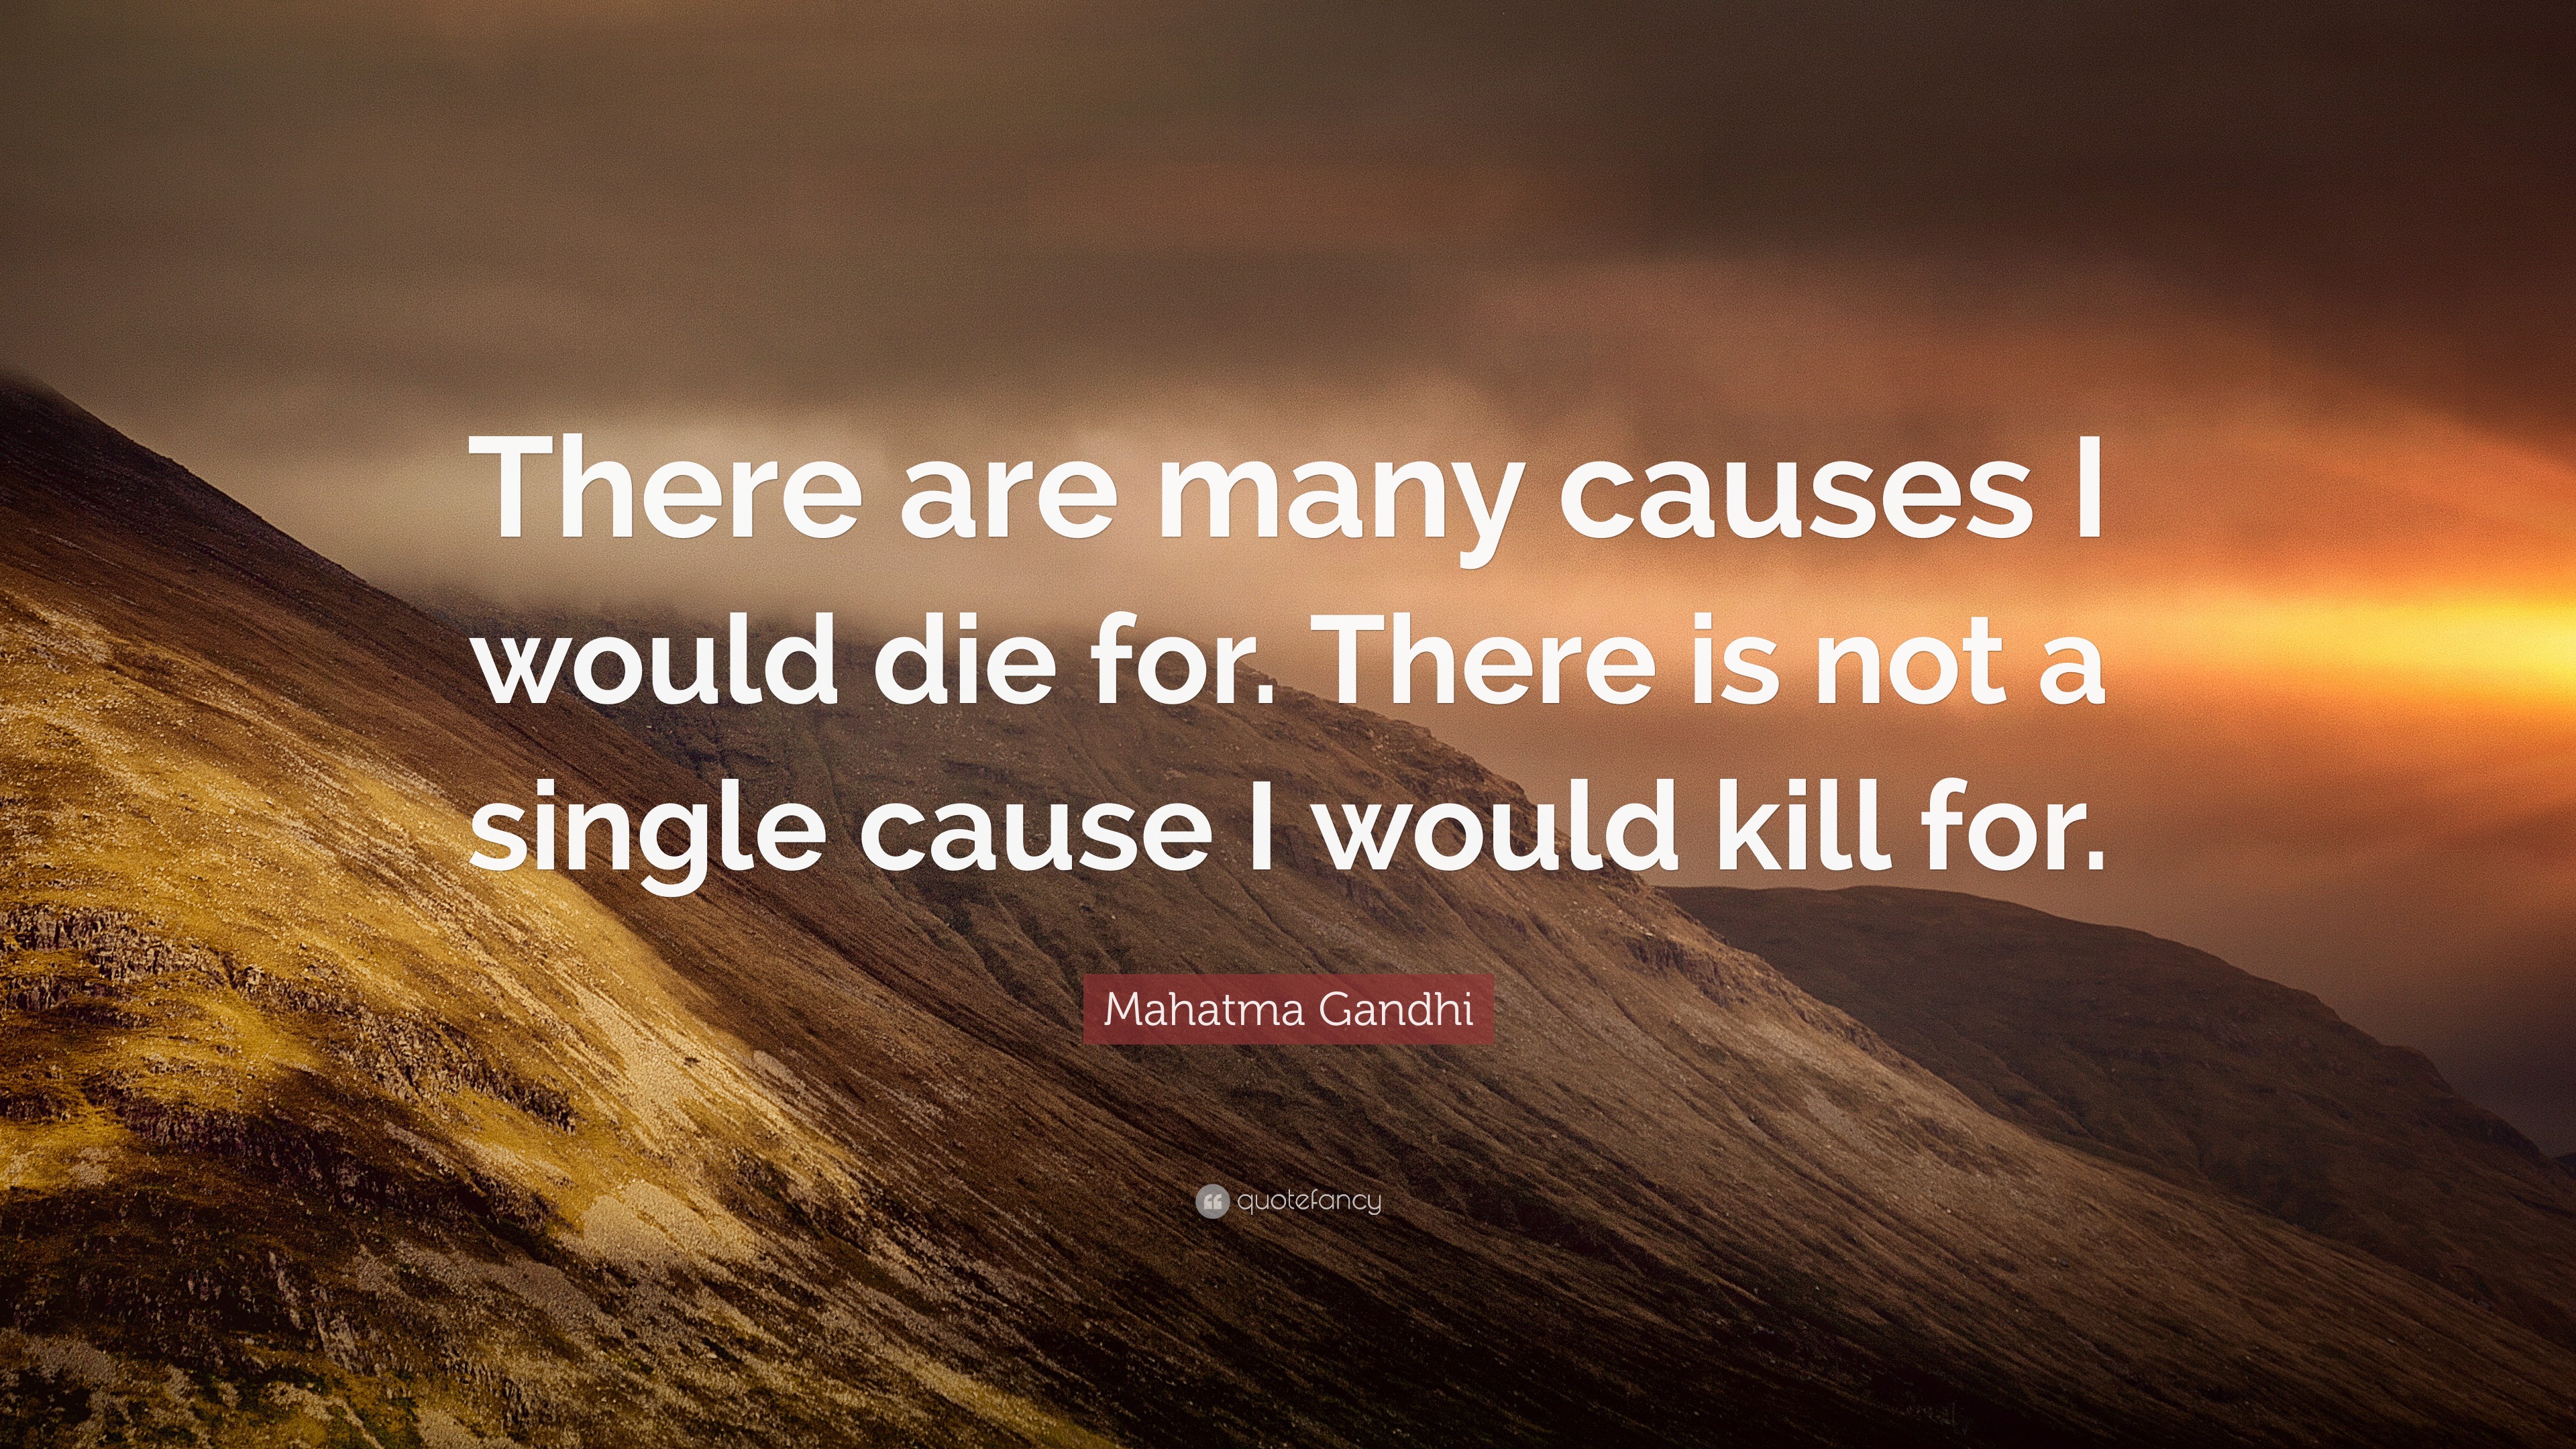 Mahatma Gandhi Quote: “There are many causes I would die for. There is ...